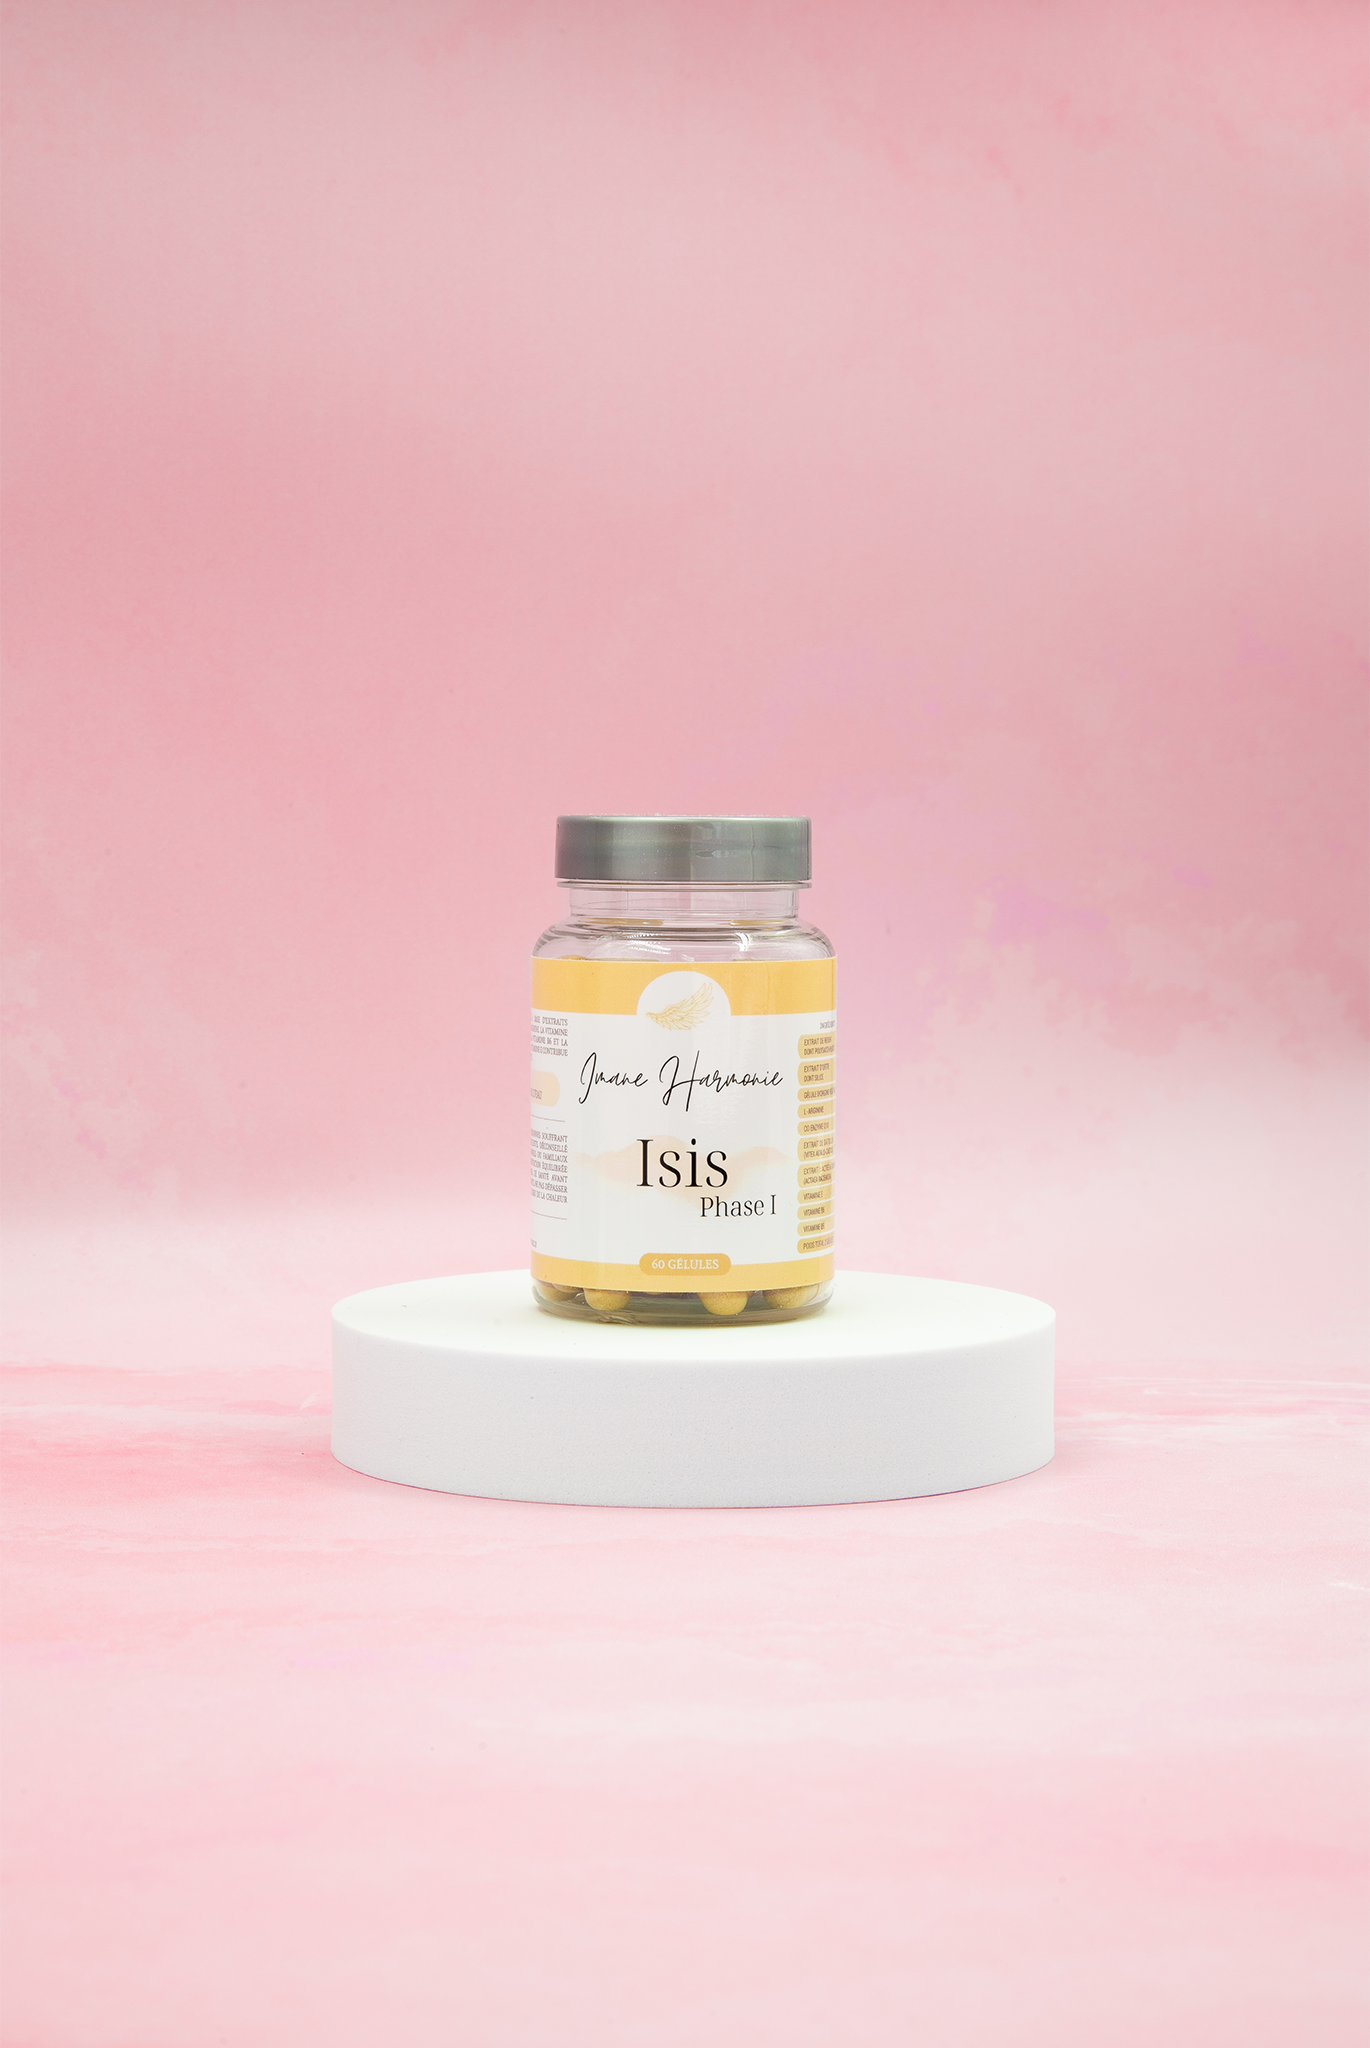 Isis Phase 1 is a dietary supplement designed to boost ovulation in women trying to conceive, especially those with irregular cycles or polycystic ovary syndrome